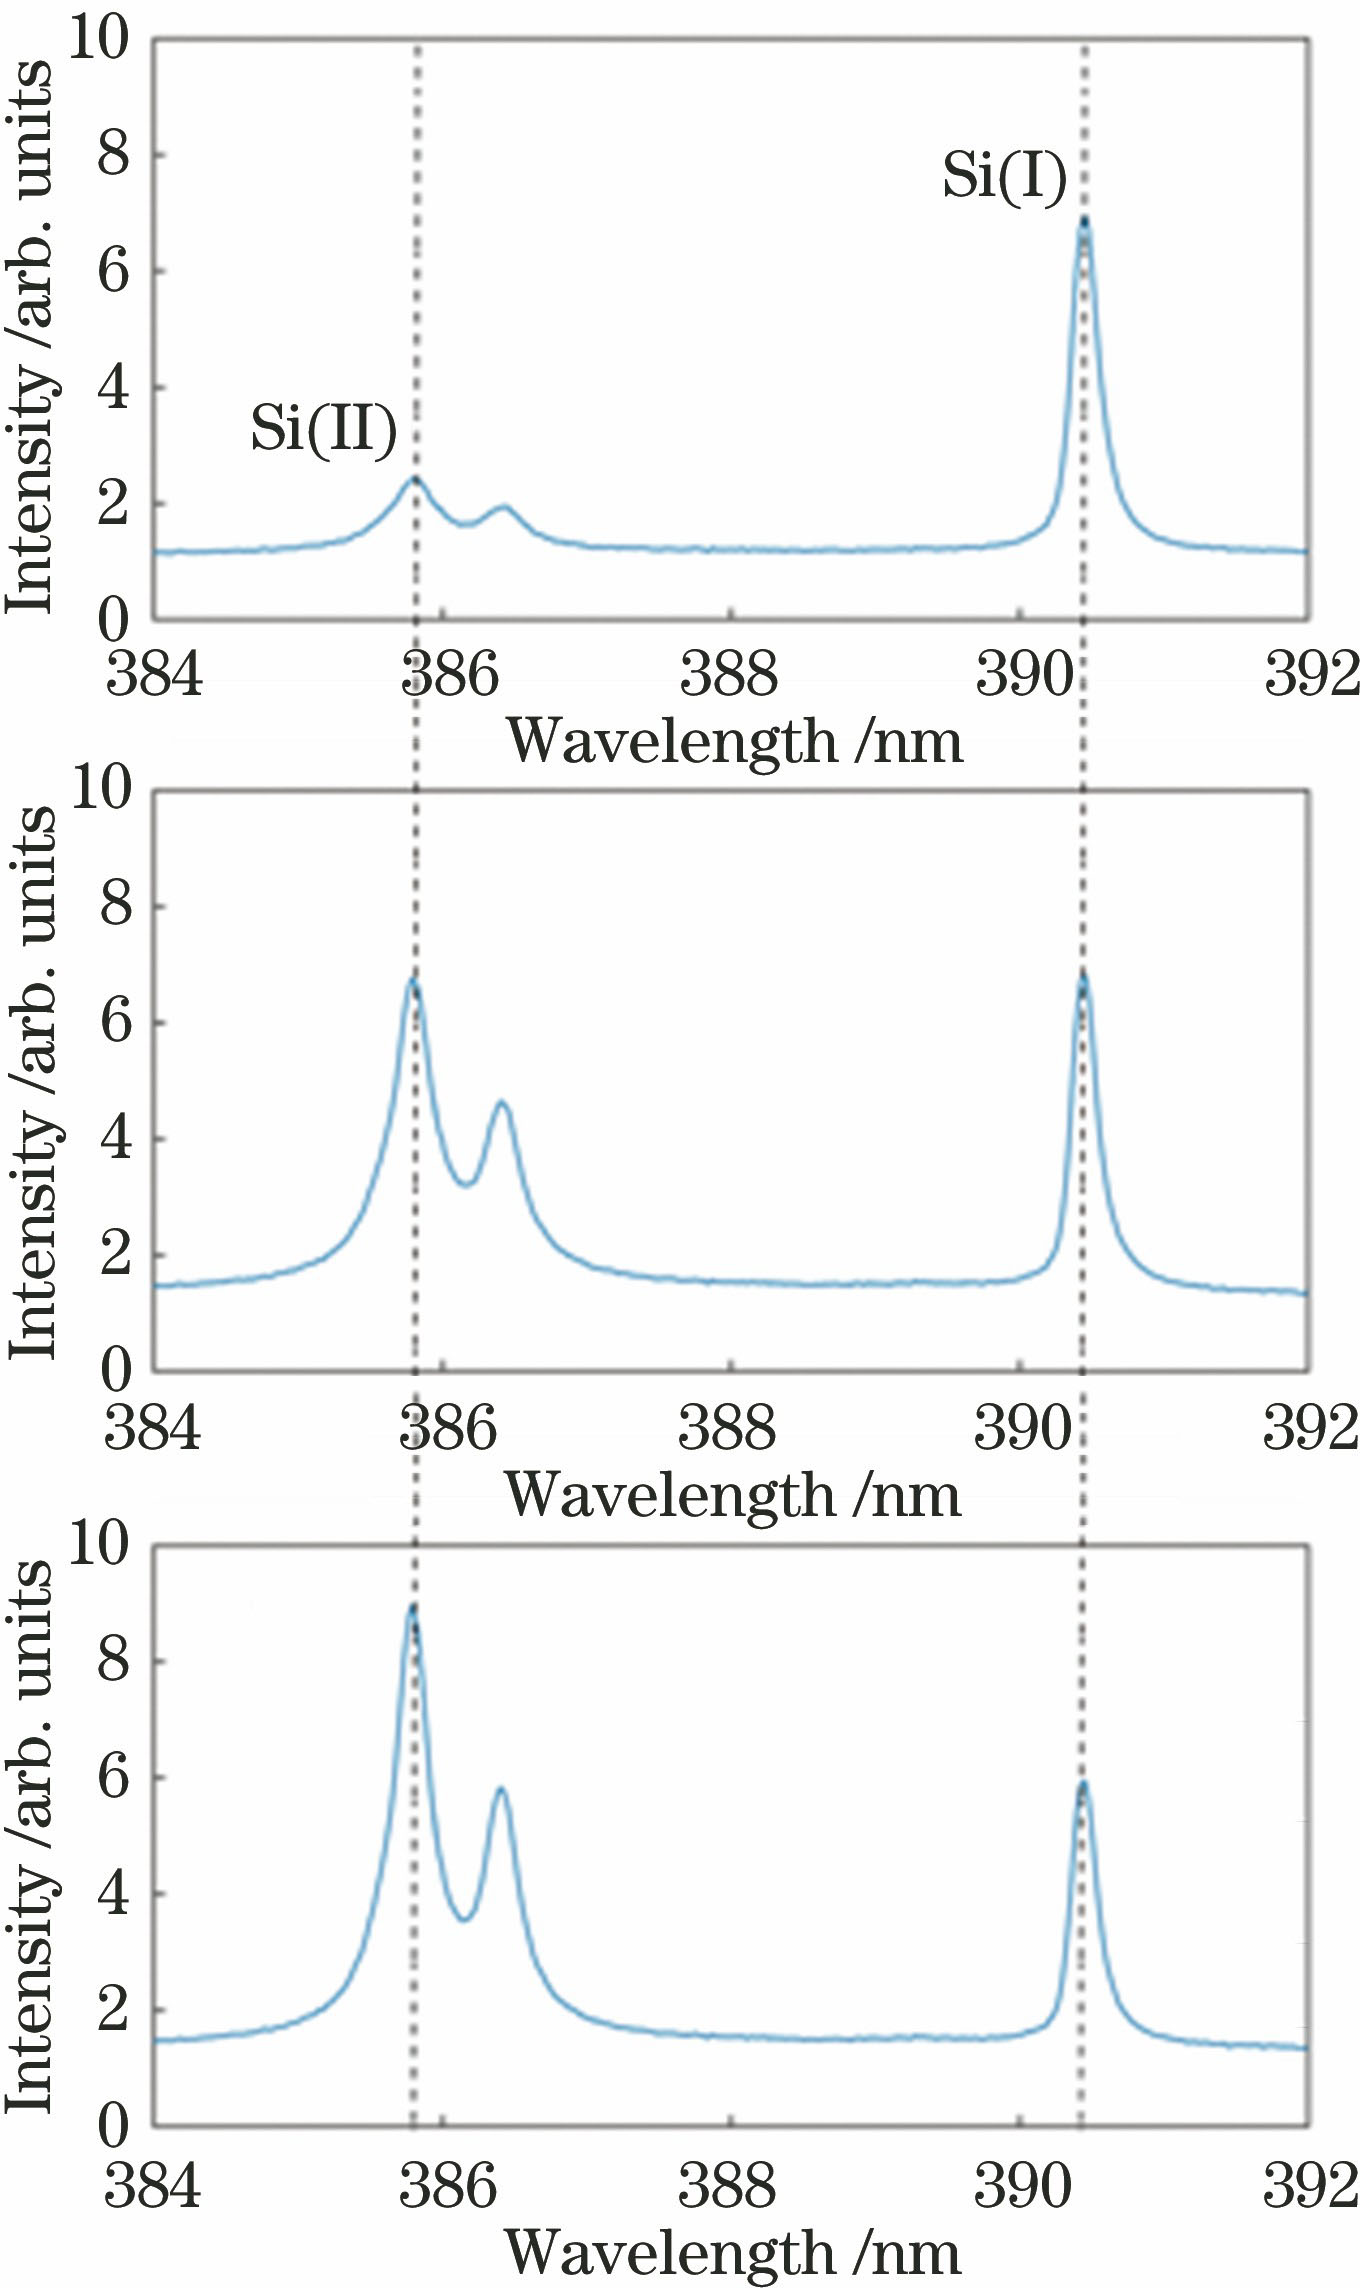 Typical emission spectra of laser-induced silicon plasmas for three distances when laser energy is 30 mJ. (a) 85.5 mm; (b) 93.5 mm; (c) 96.0 mm